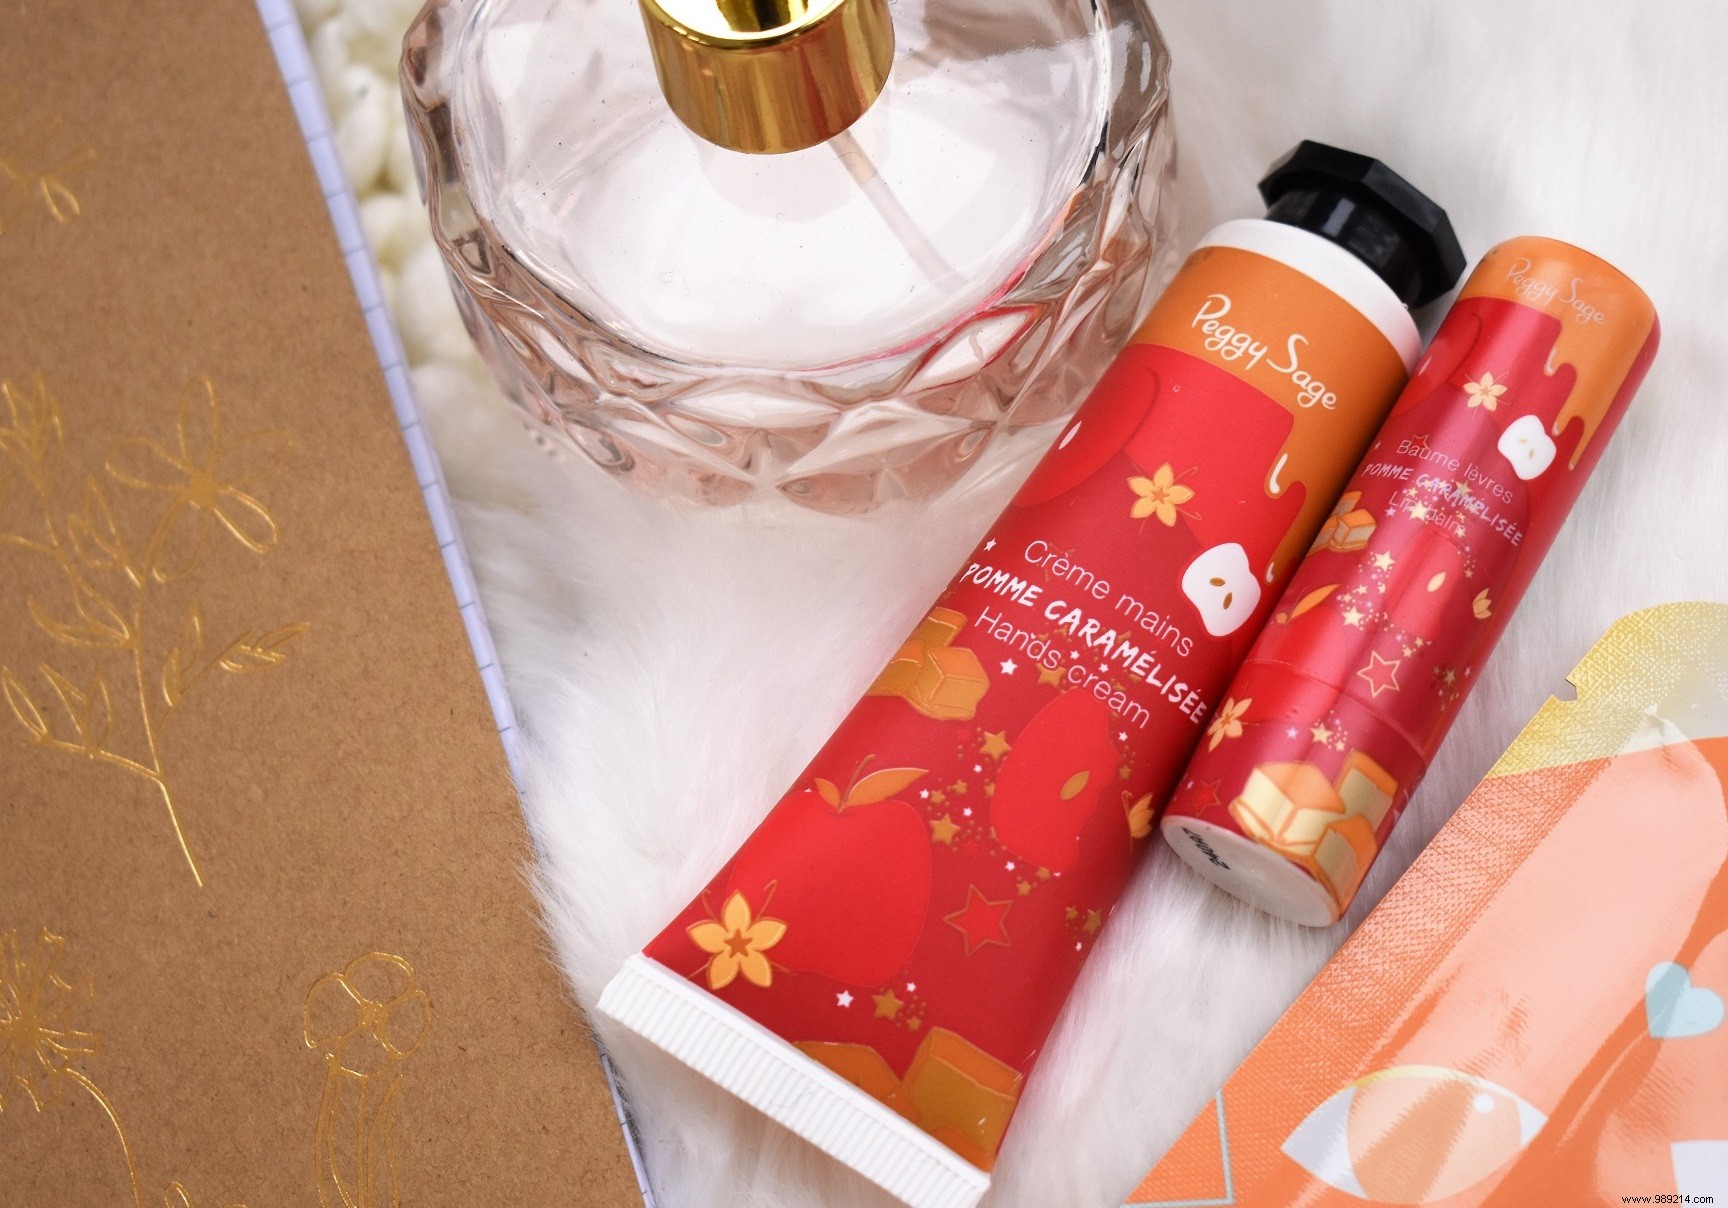 Cozy winter with the new Peggy Sage products 